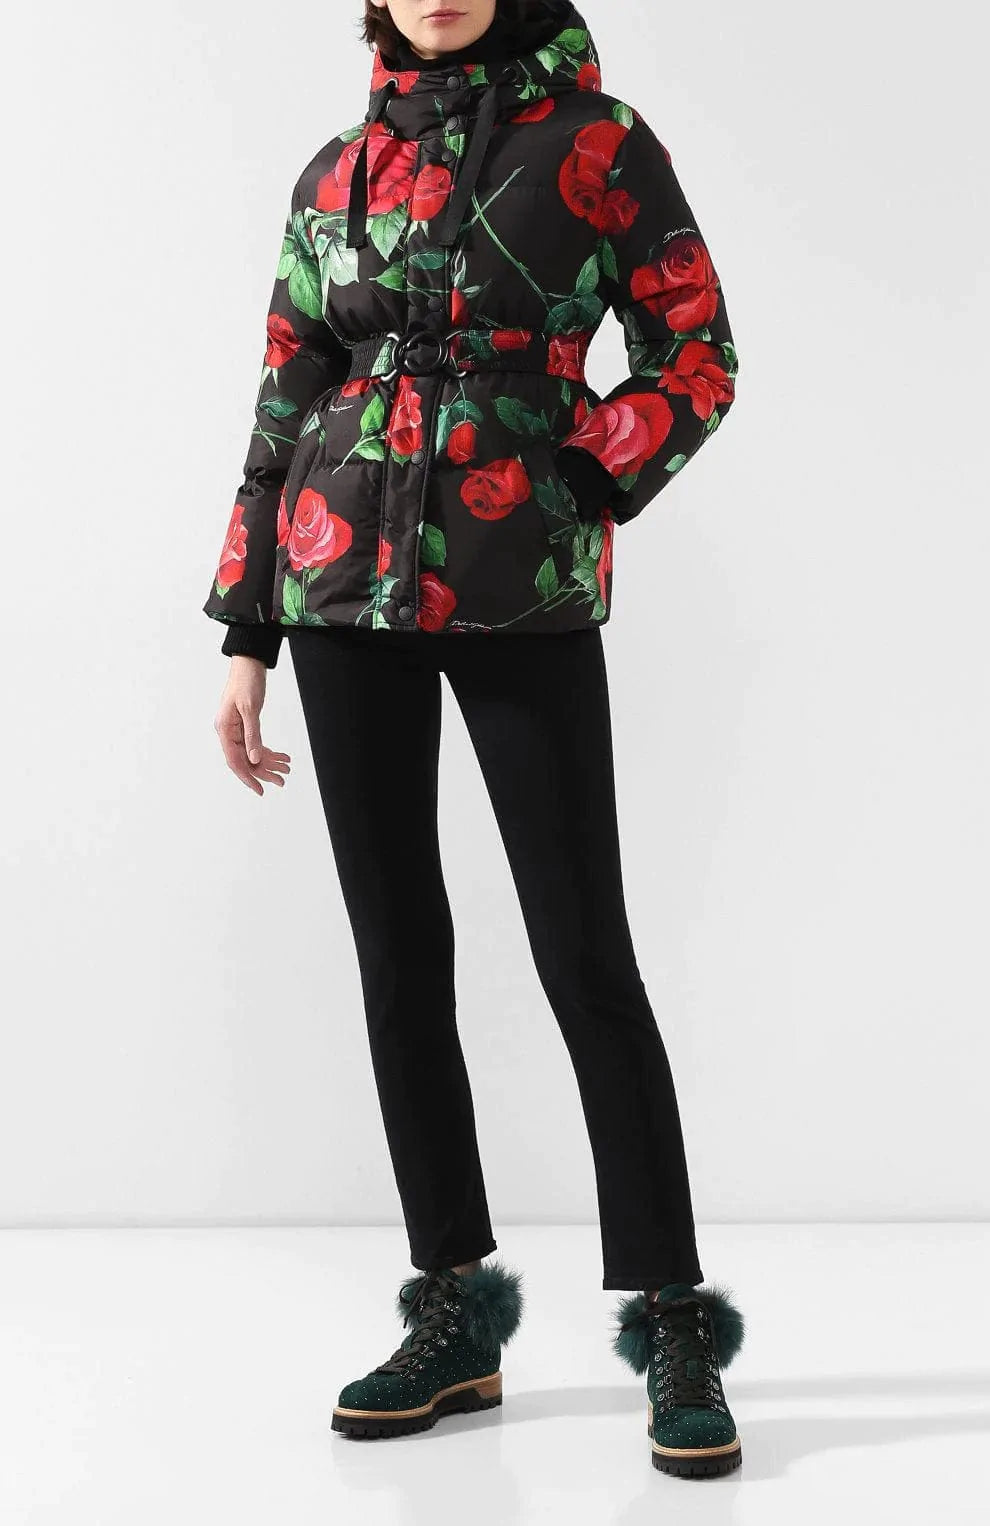 Dolce & Gabbana Hooded Floral-Print Down Jacket